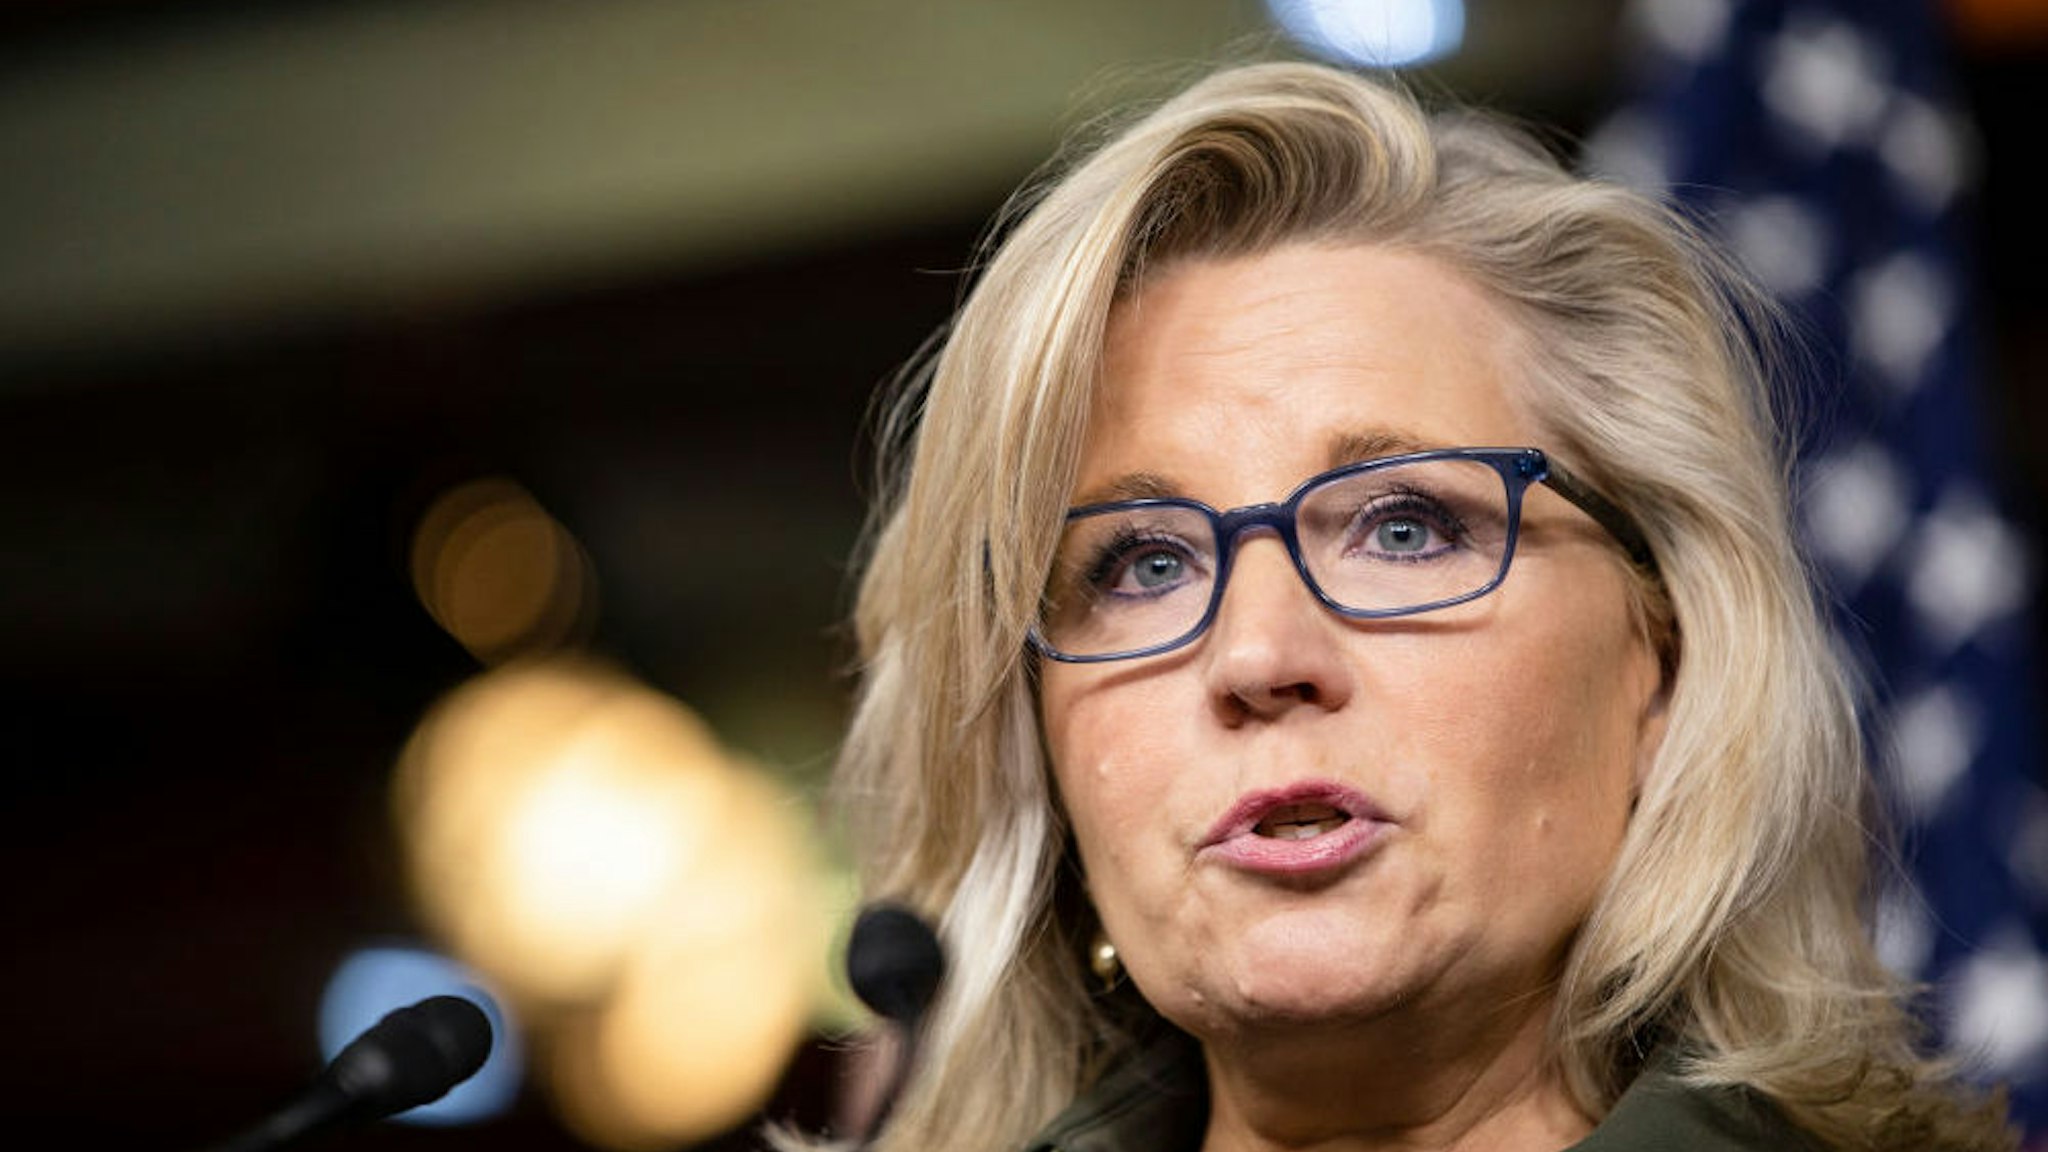 WASHINGTON, DC - DECEMBER 17: Republican Conference Chairman Rep. Liz Cheney (R-WY) speaks during a press conference at the US Capitol on December 17, 2019 in Washington, DC. House Republican leaders criticized their Democratic colleagues handling of the Impeachment Proceedings of President Donald Trump.